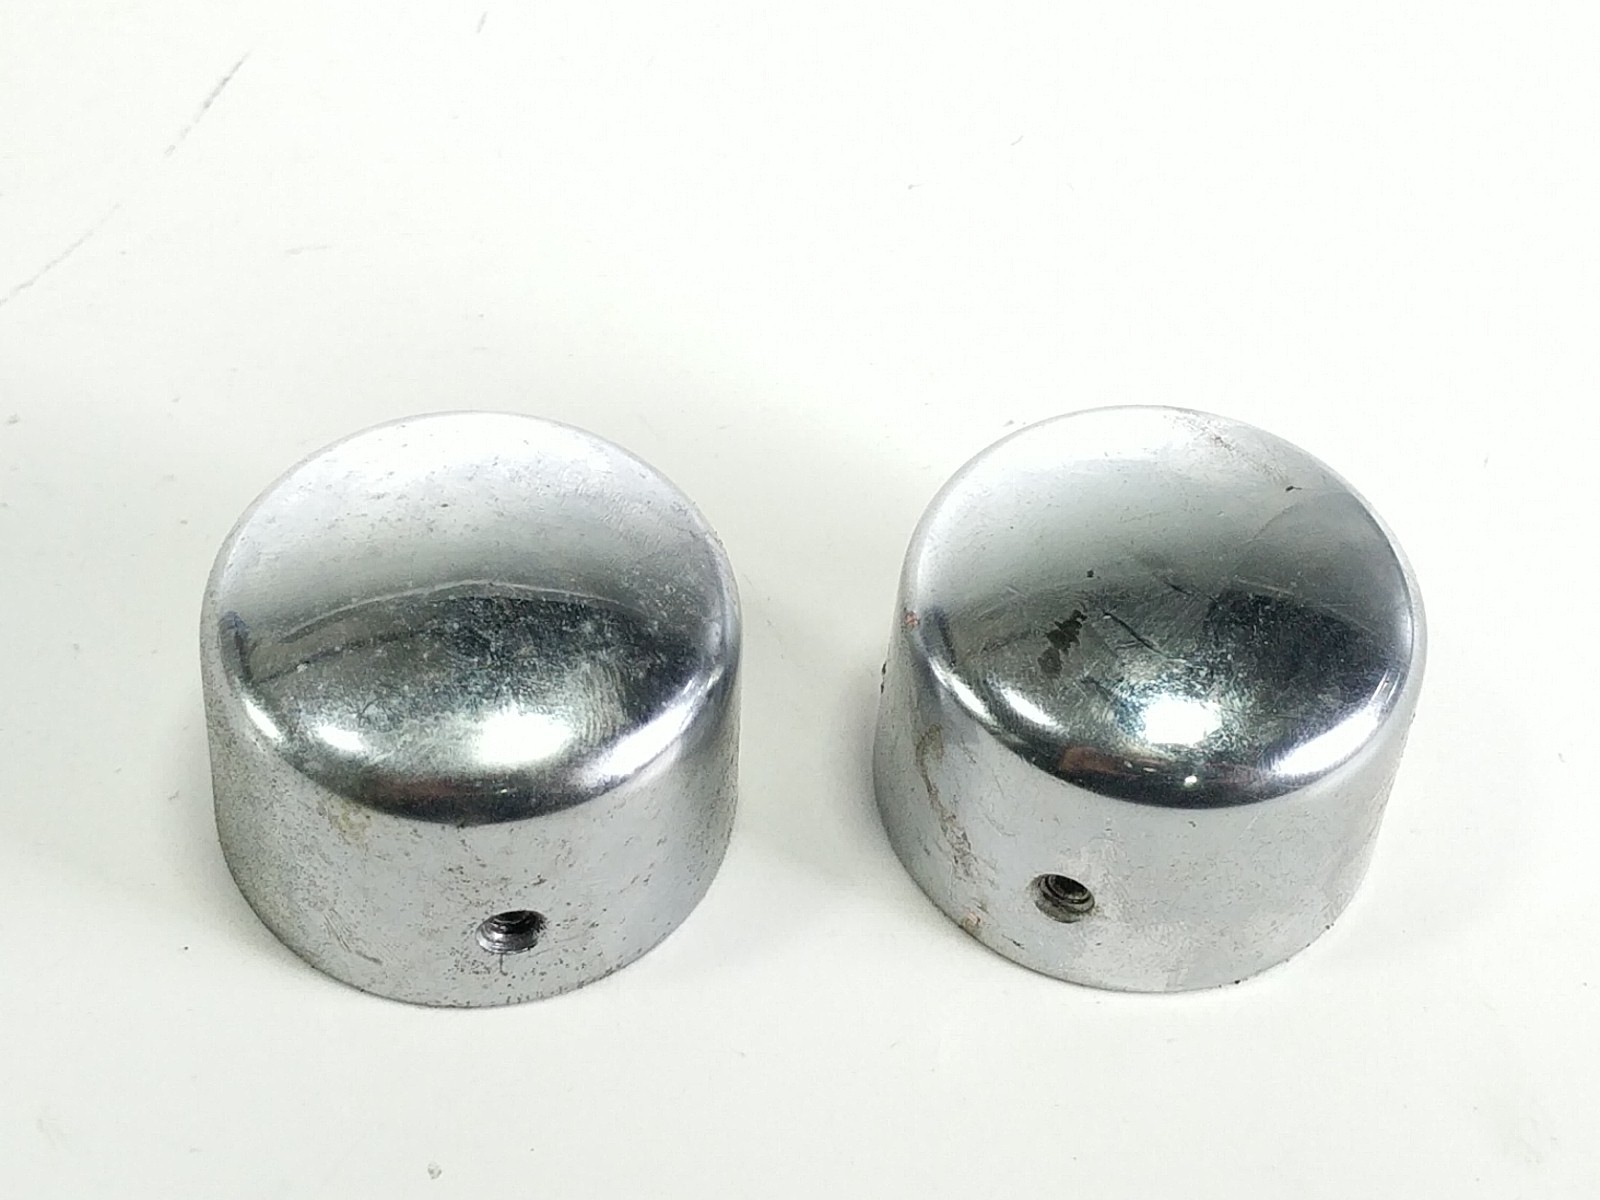 07 Harley Davidson Softail Deluxe FLSTN Front Axle Cap Covers